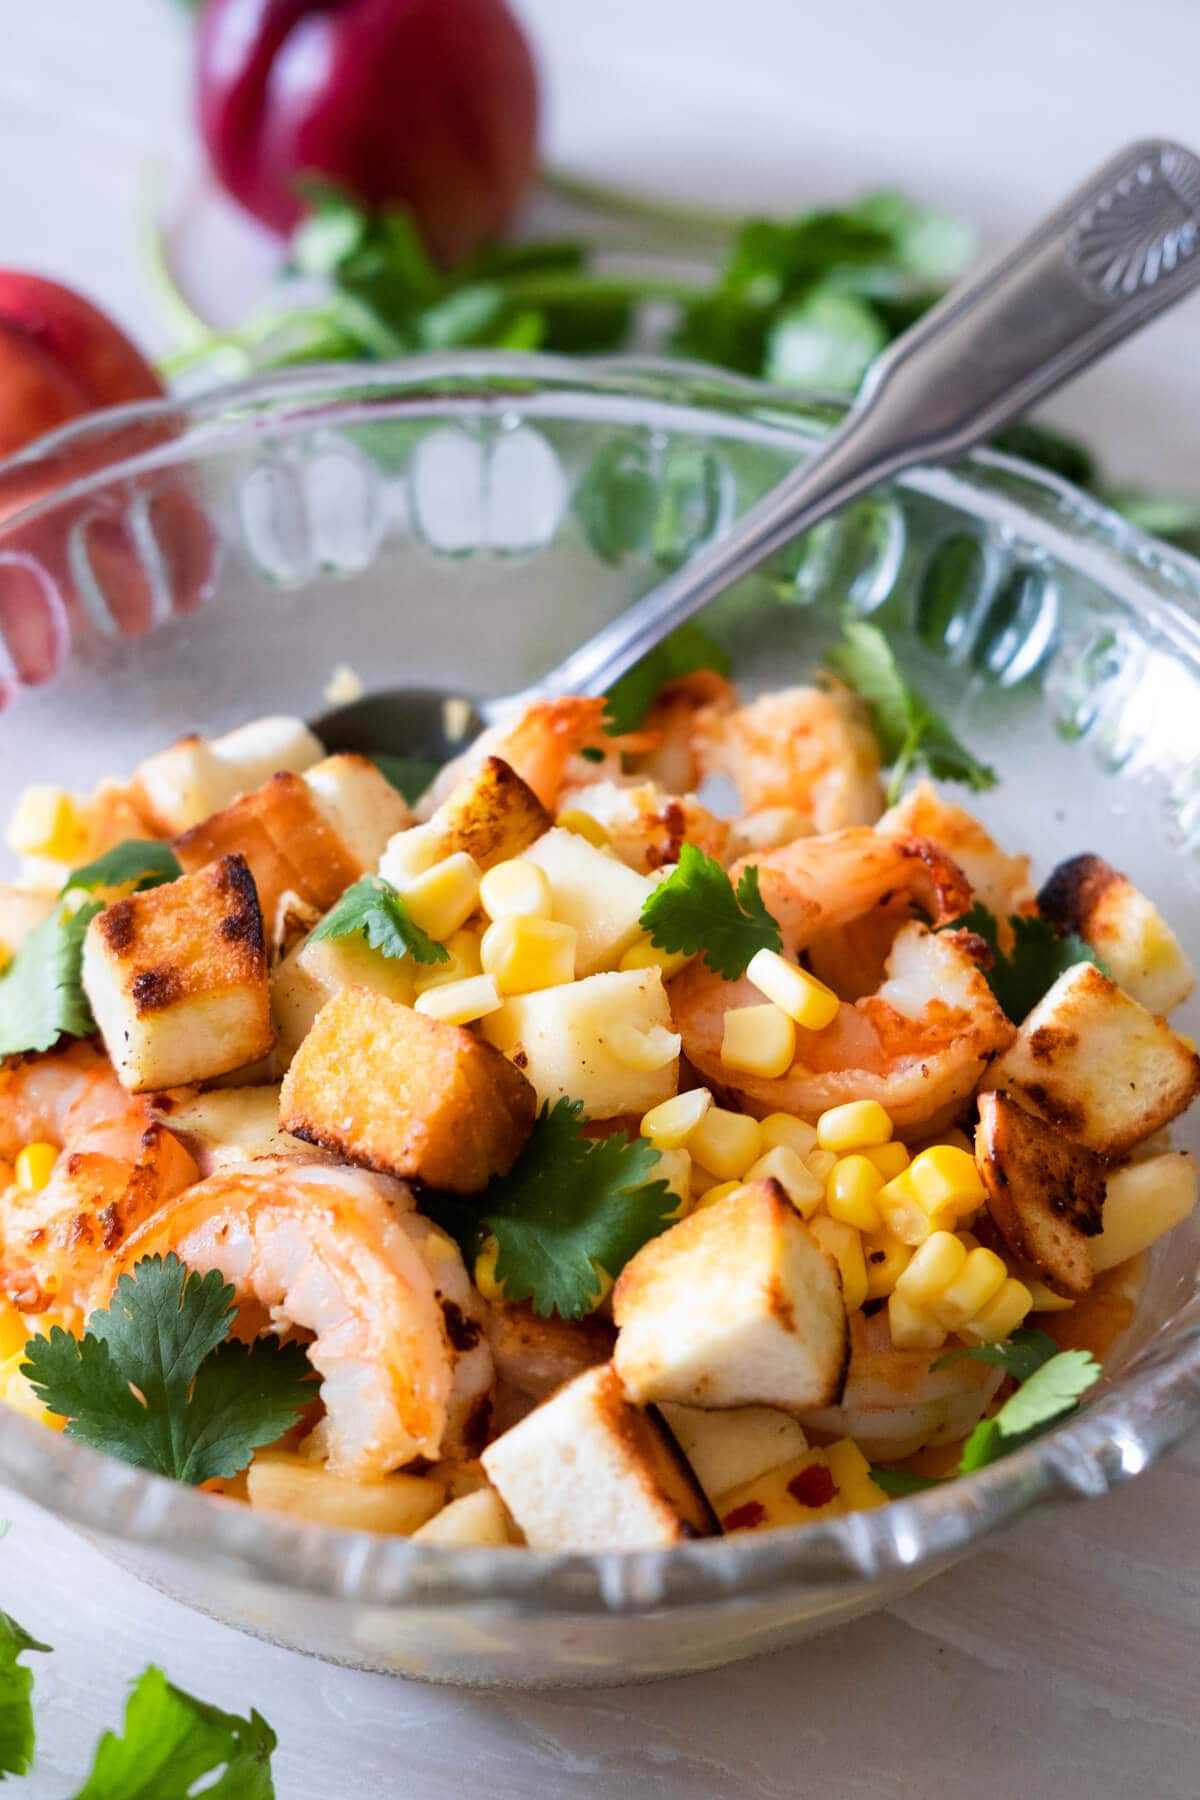 Prawn salad with peach topped with sweet corn, crountons and cilantro leaves. 